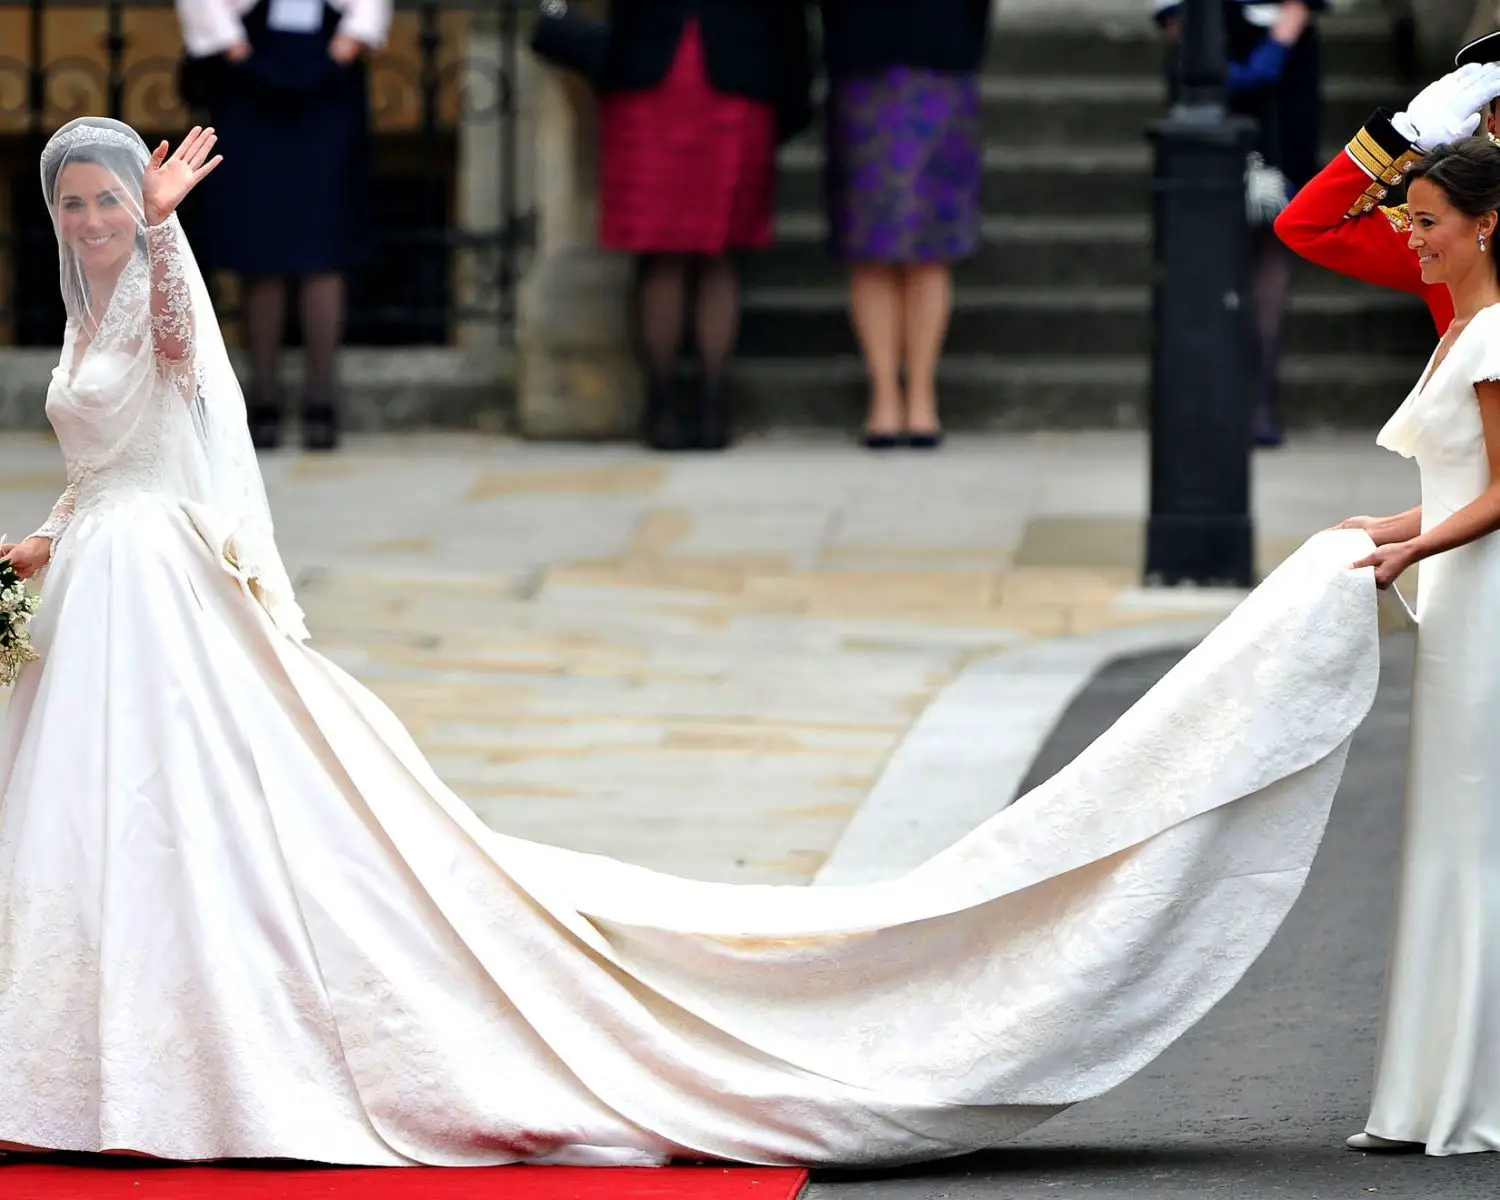 The Duchess of Cambridge arriving at her wedding